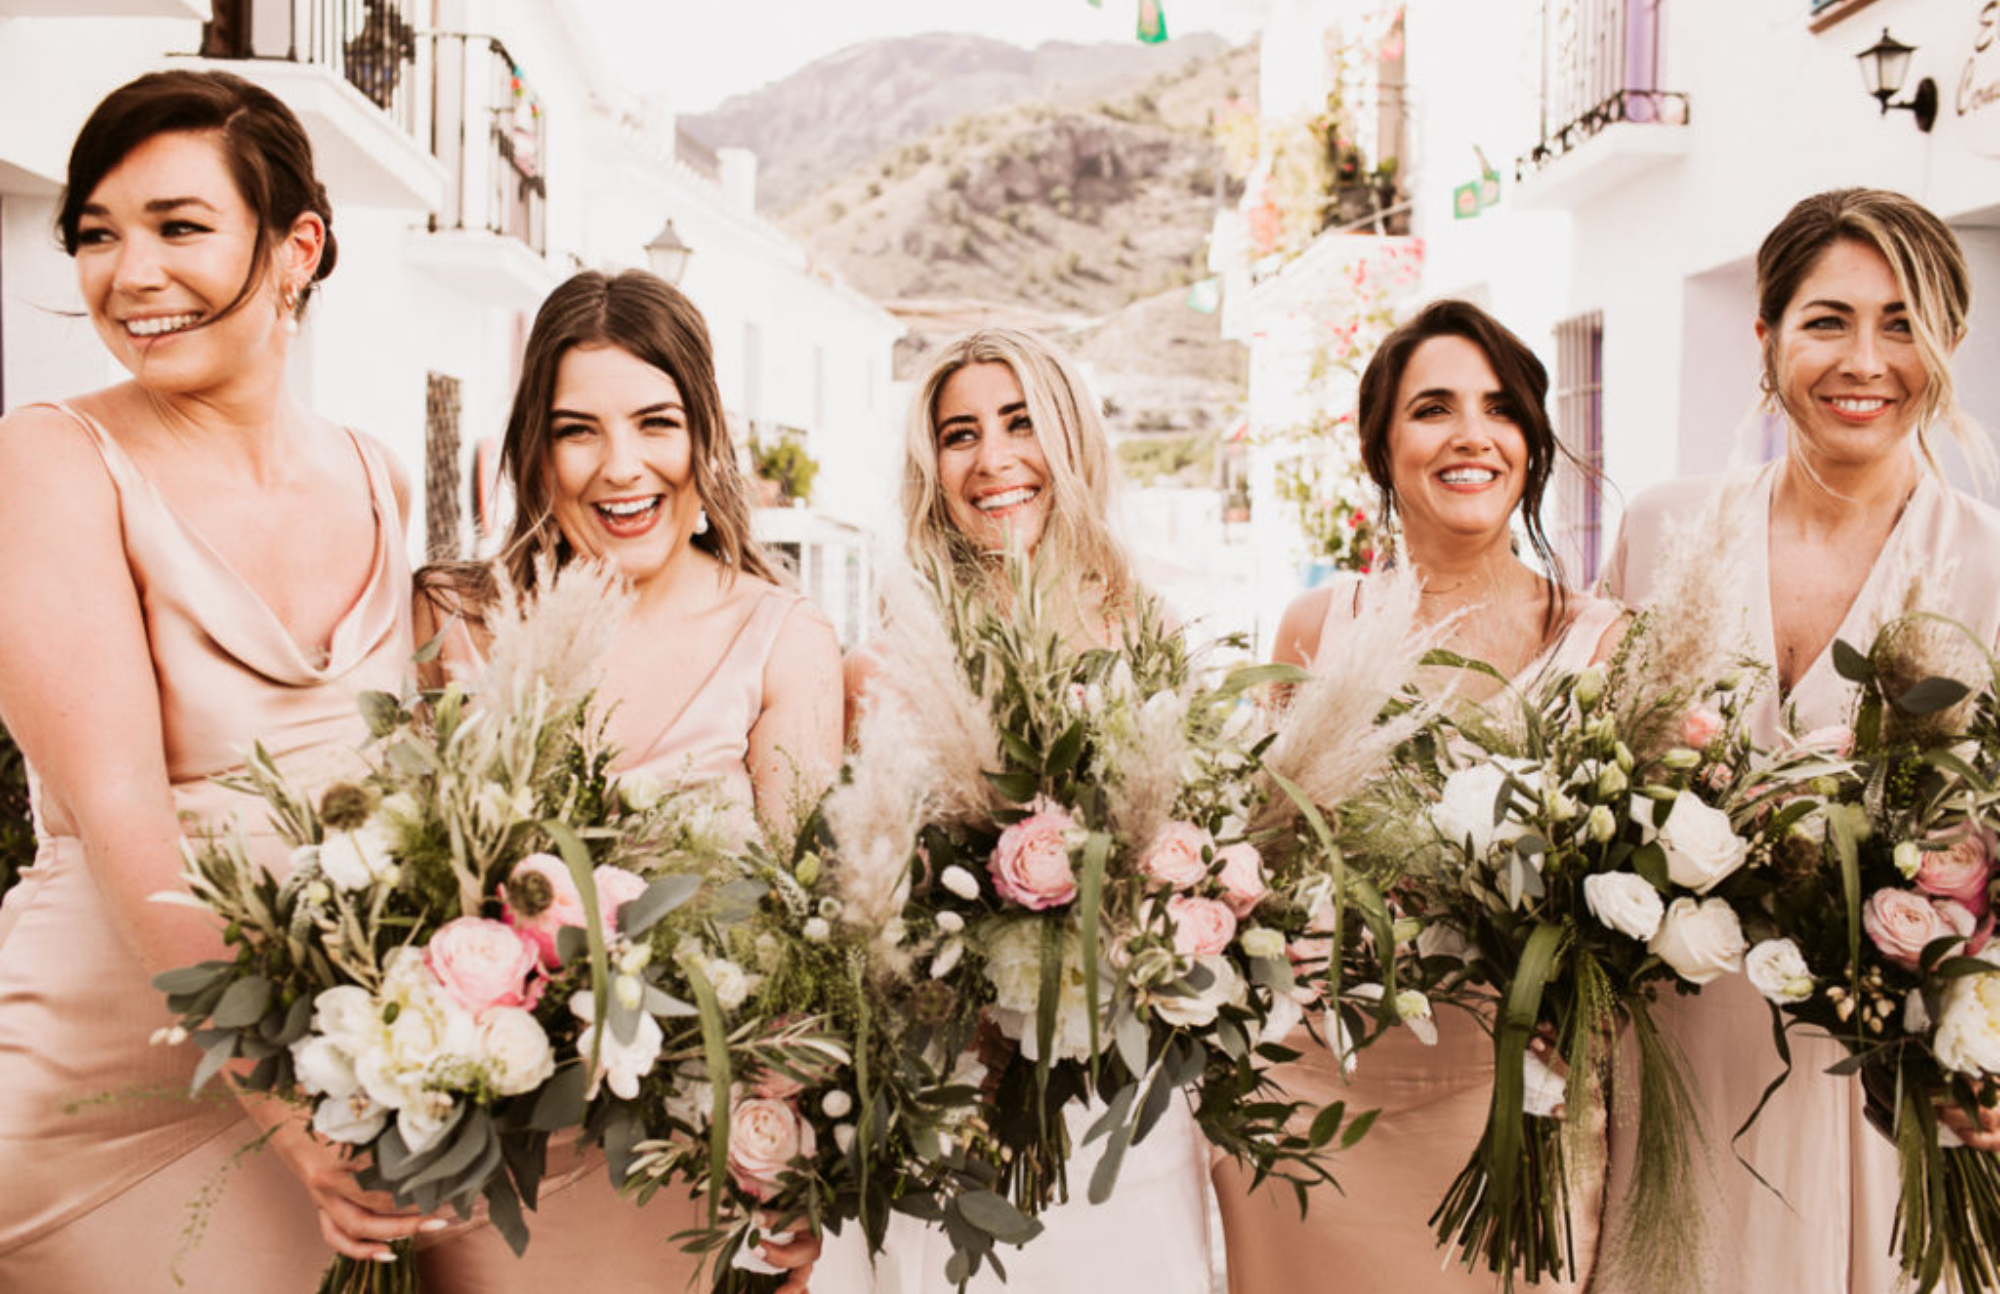 What To Expect As A First Time Bridesmaid